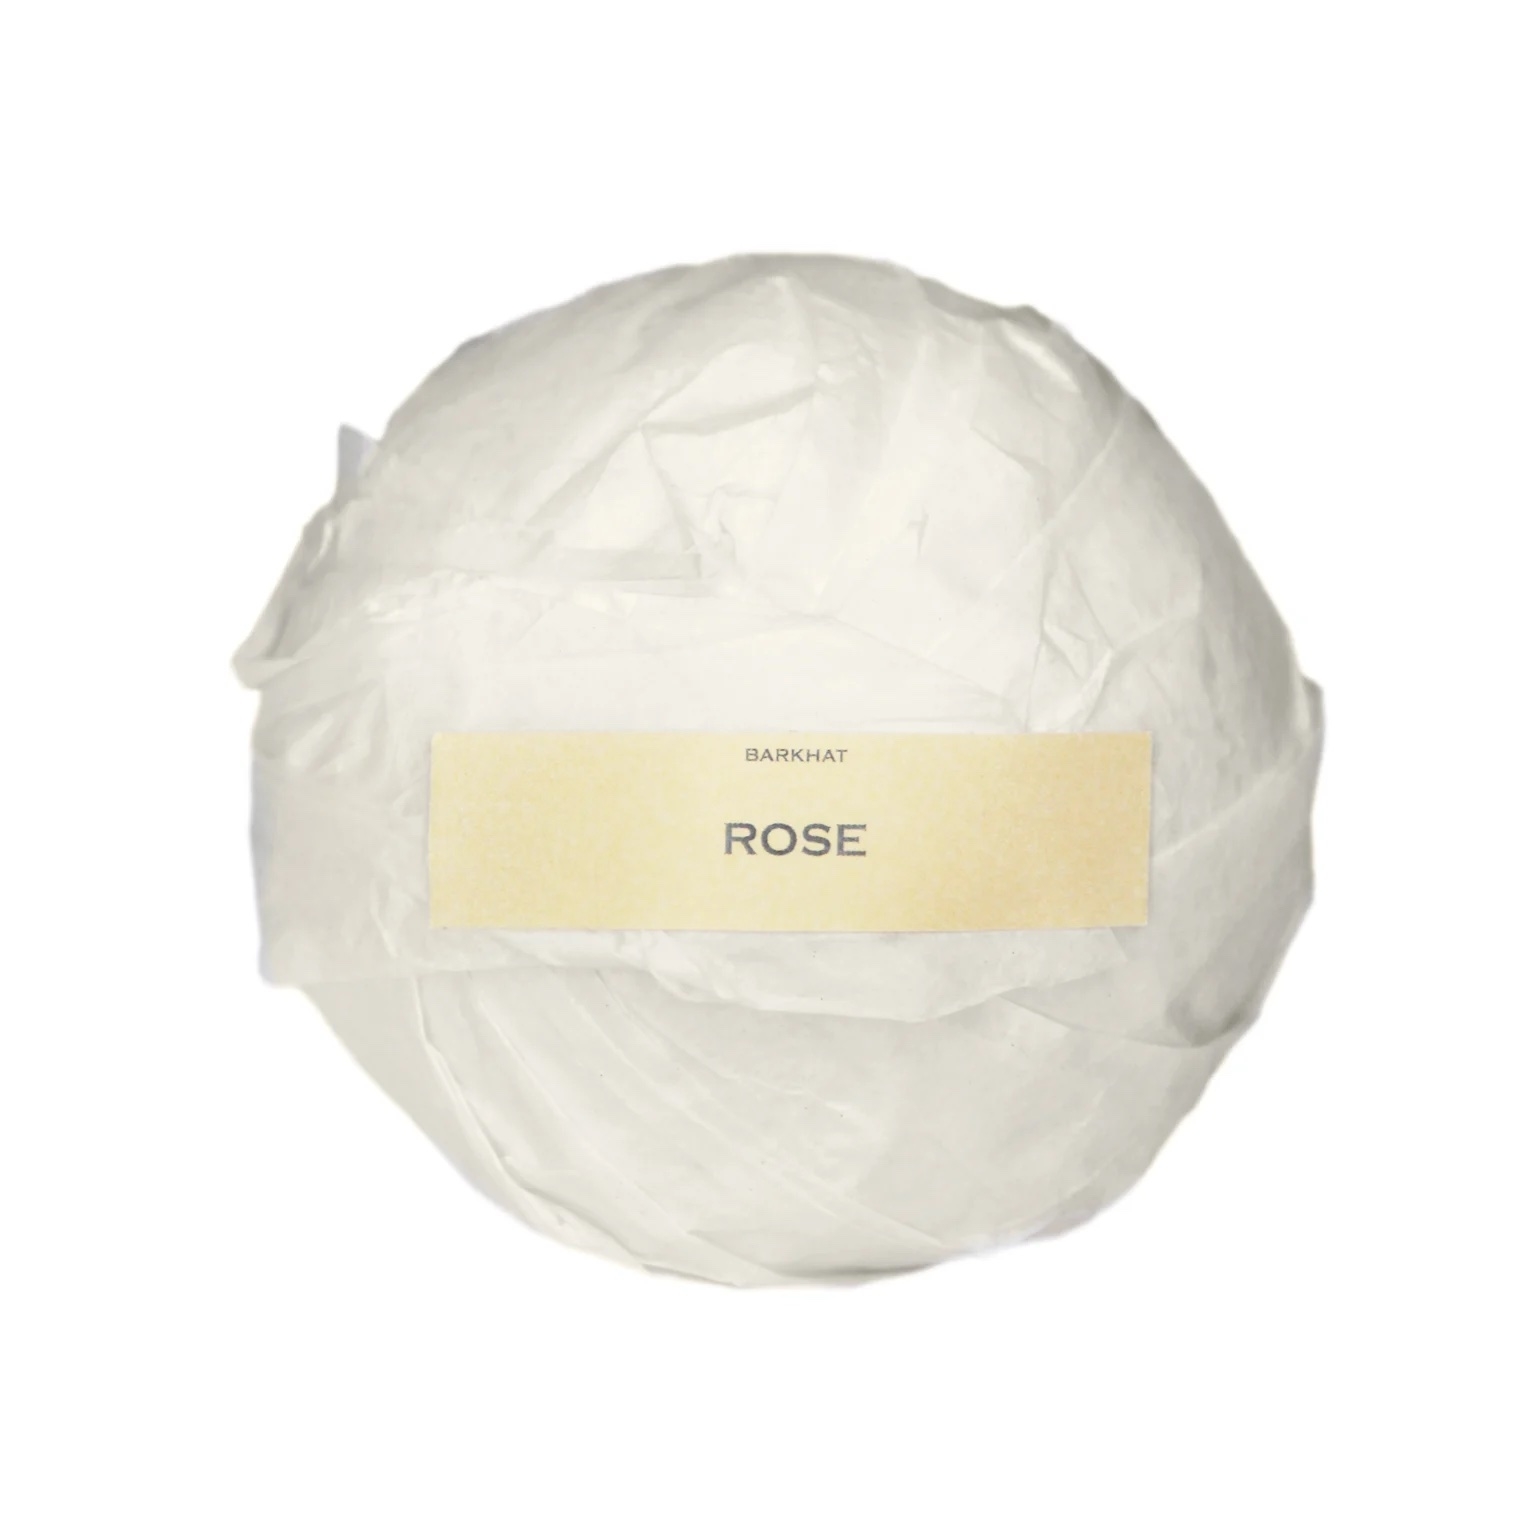 the rose bath bomb wrapped in white paper